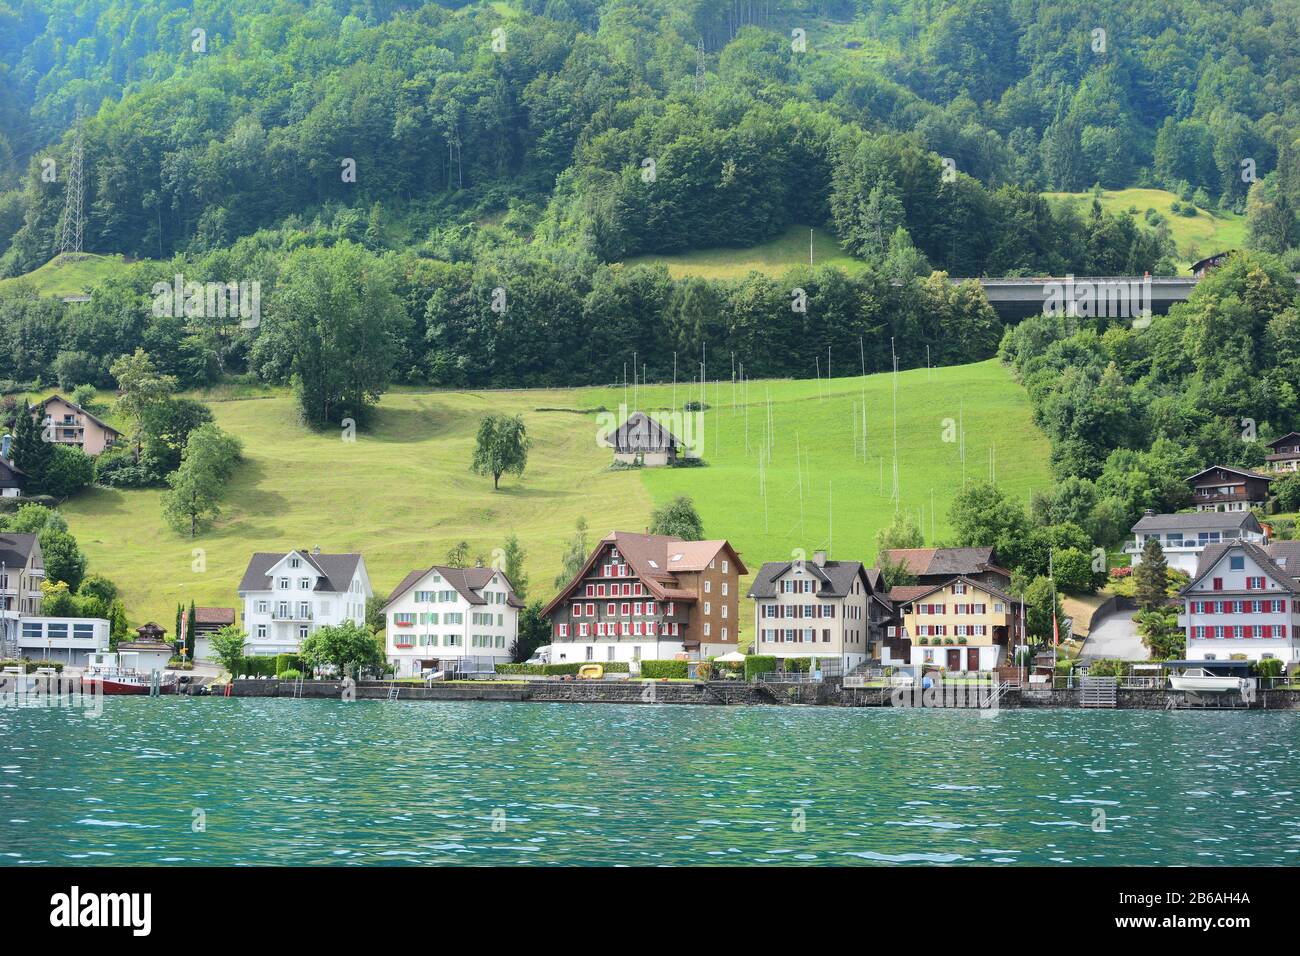 BECKENRIED, SWITZERLAND - JULY 4, 2014: Homes and Businesses in Beckenried, Beckenried is located on teh shores of Lake Lucern. Stock Photo